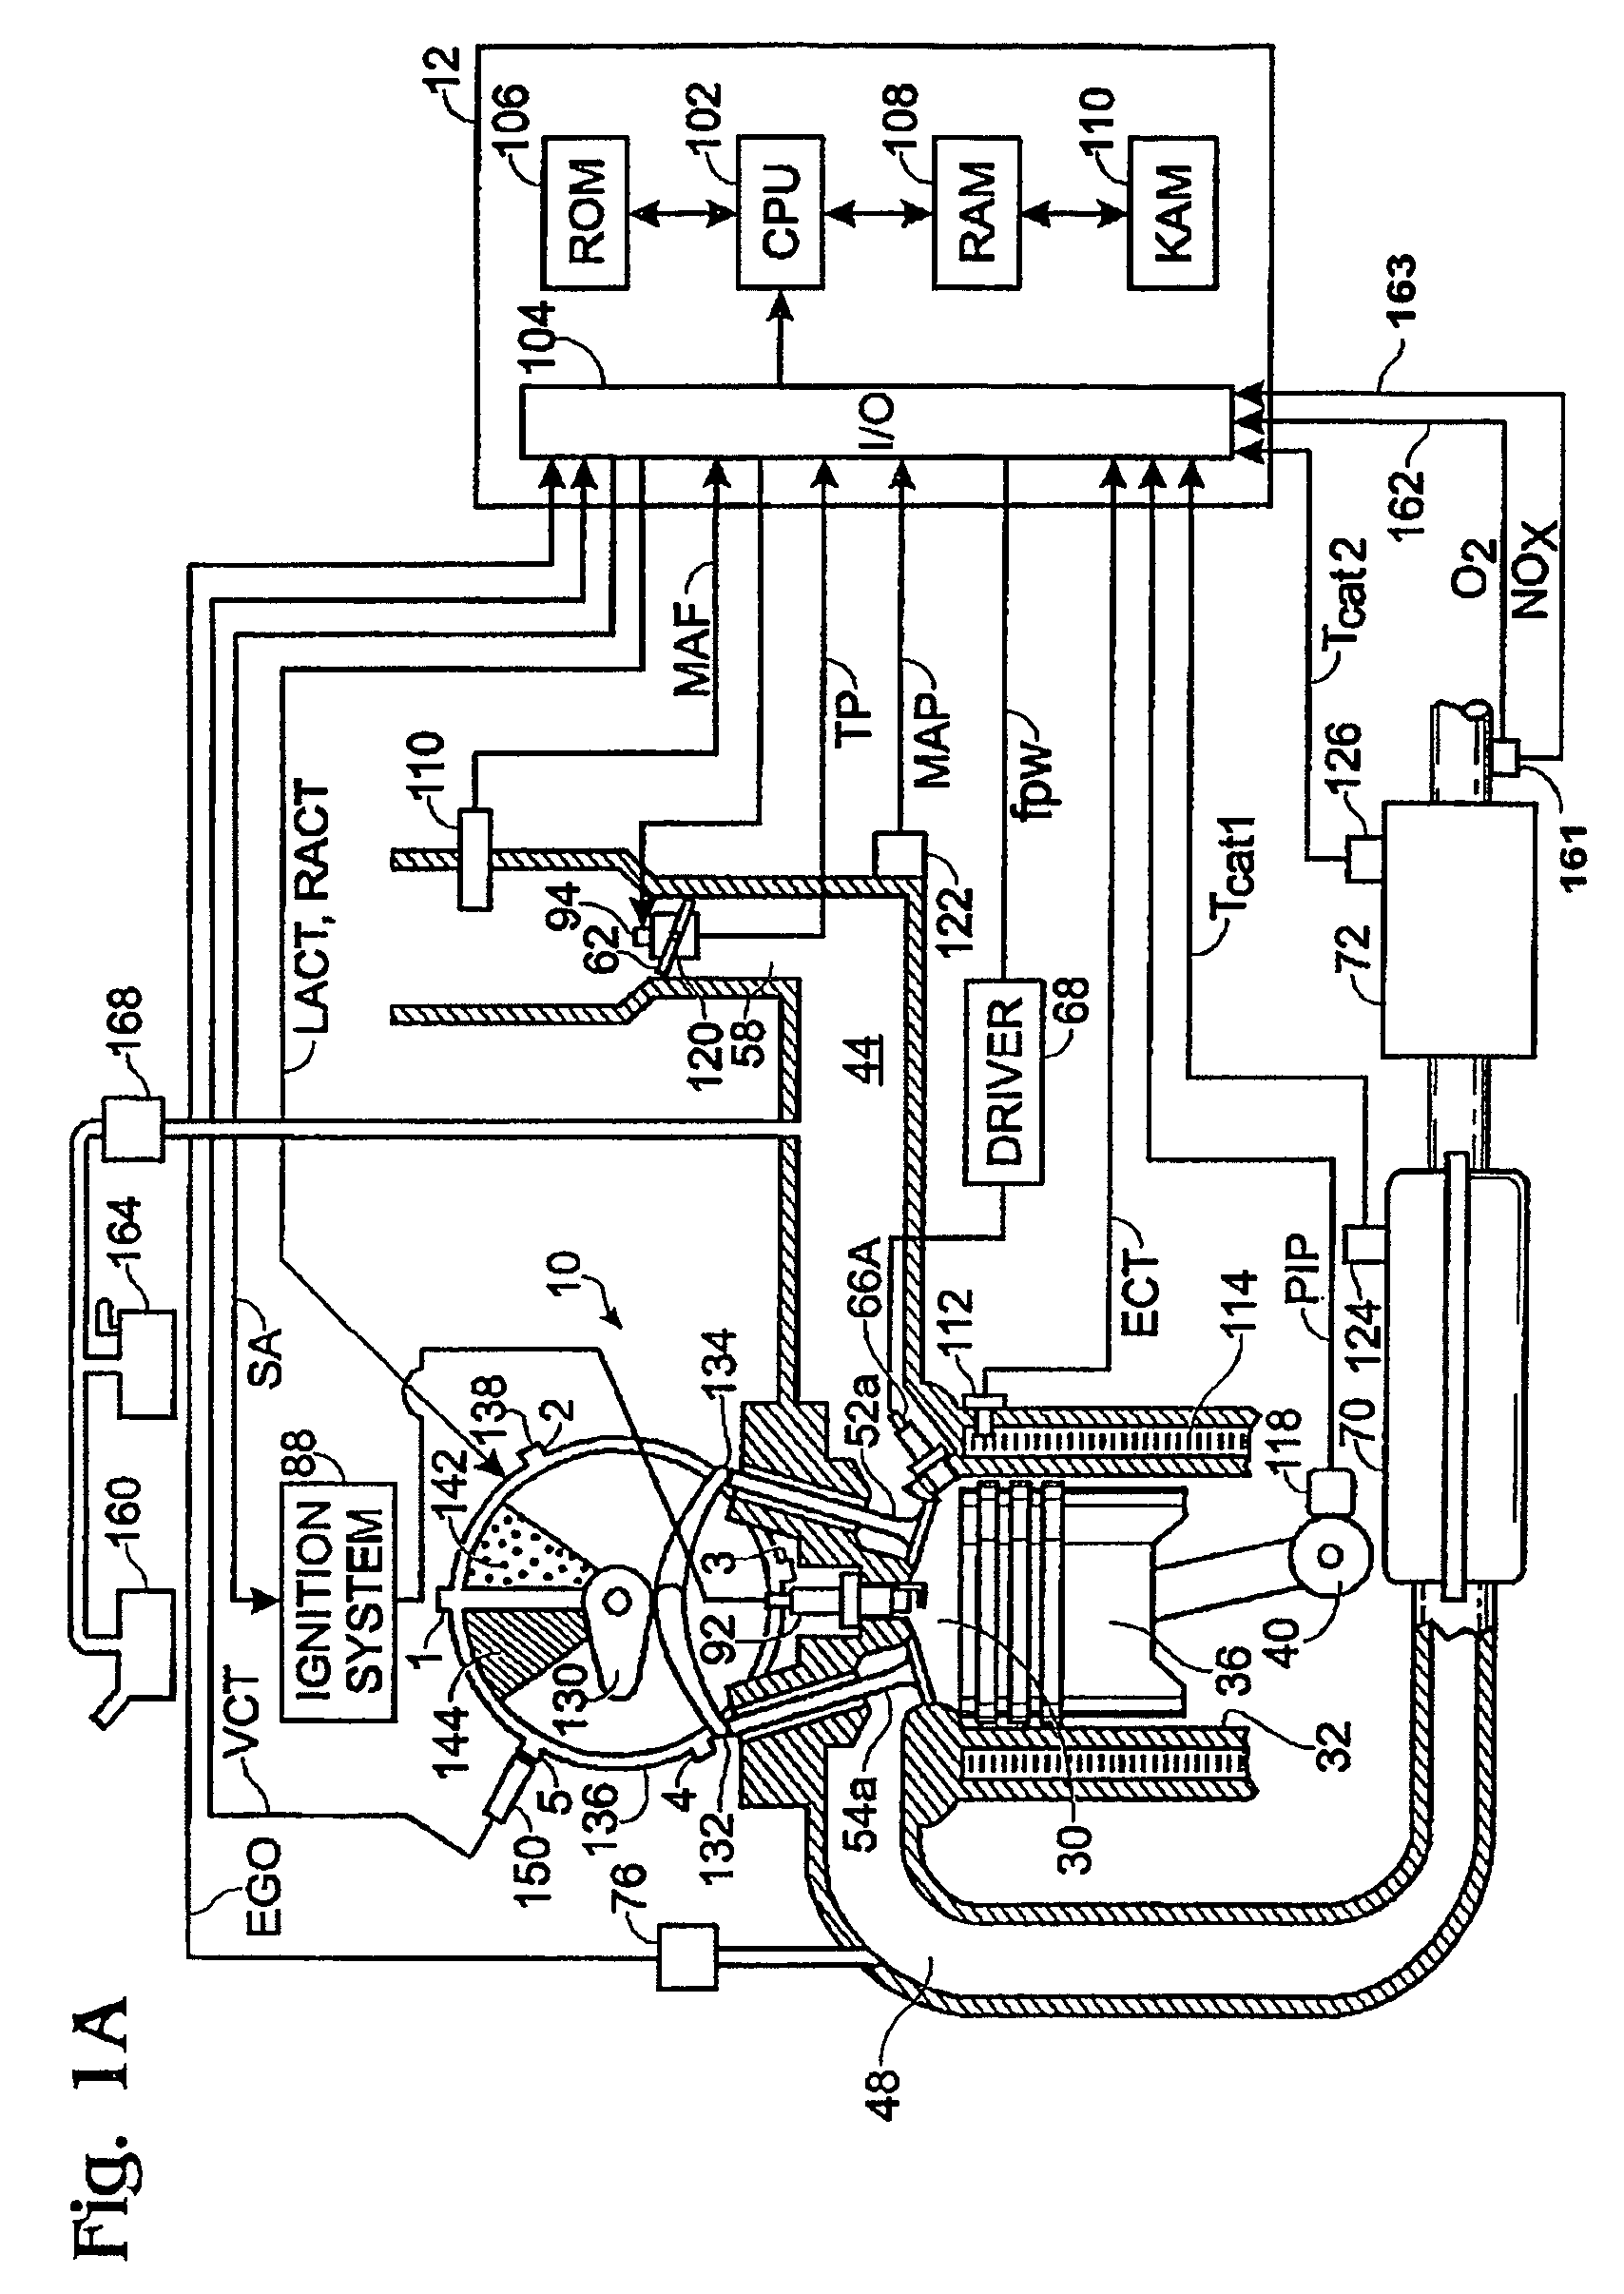 Engine control system with mixed exhaust gas oxygen sensor types